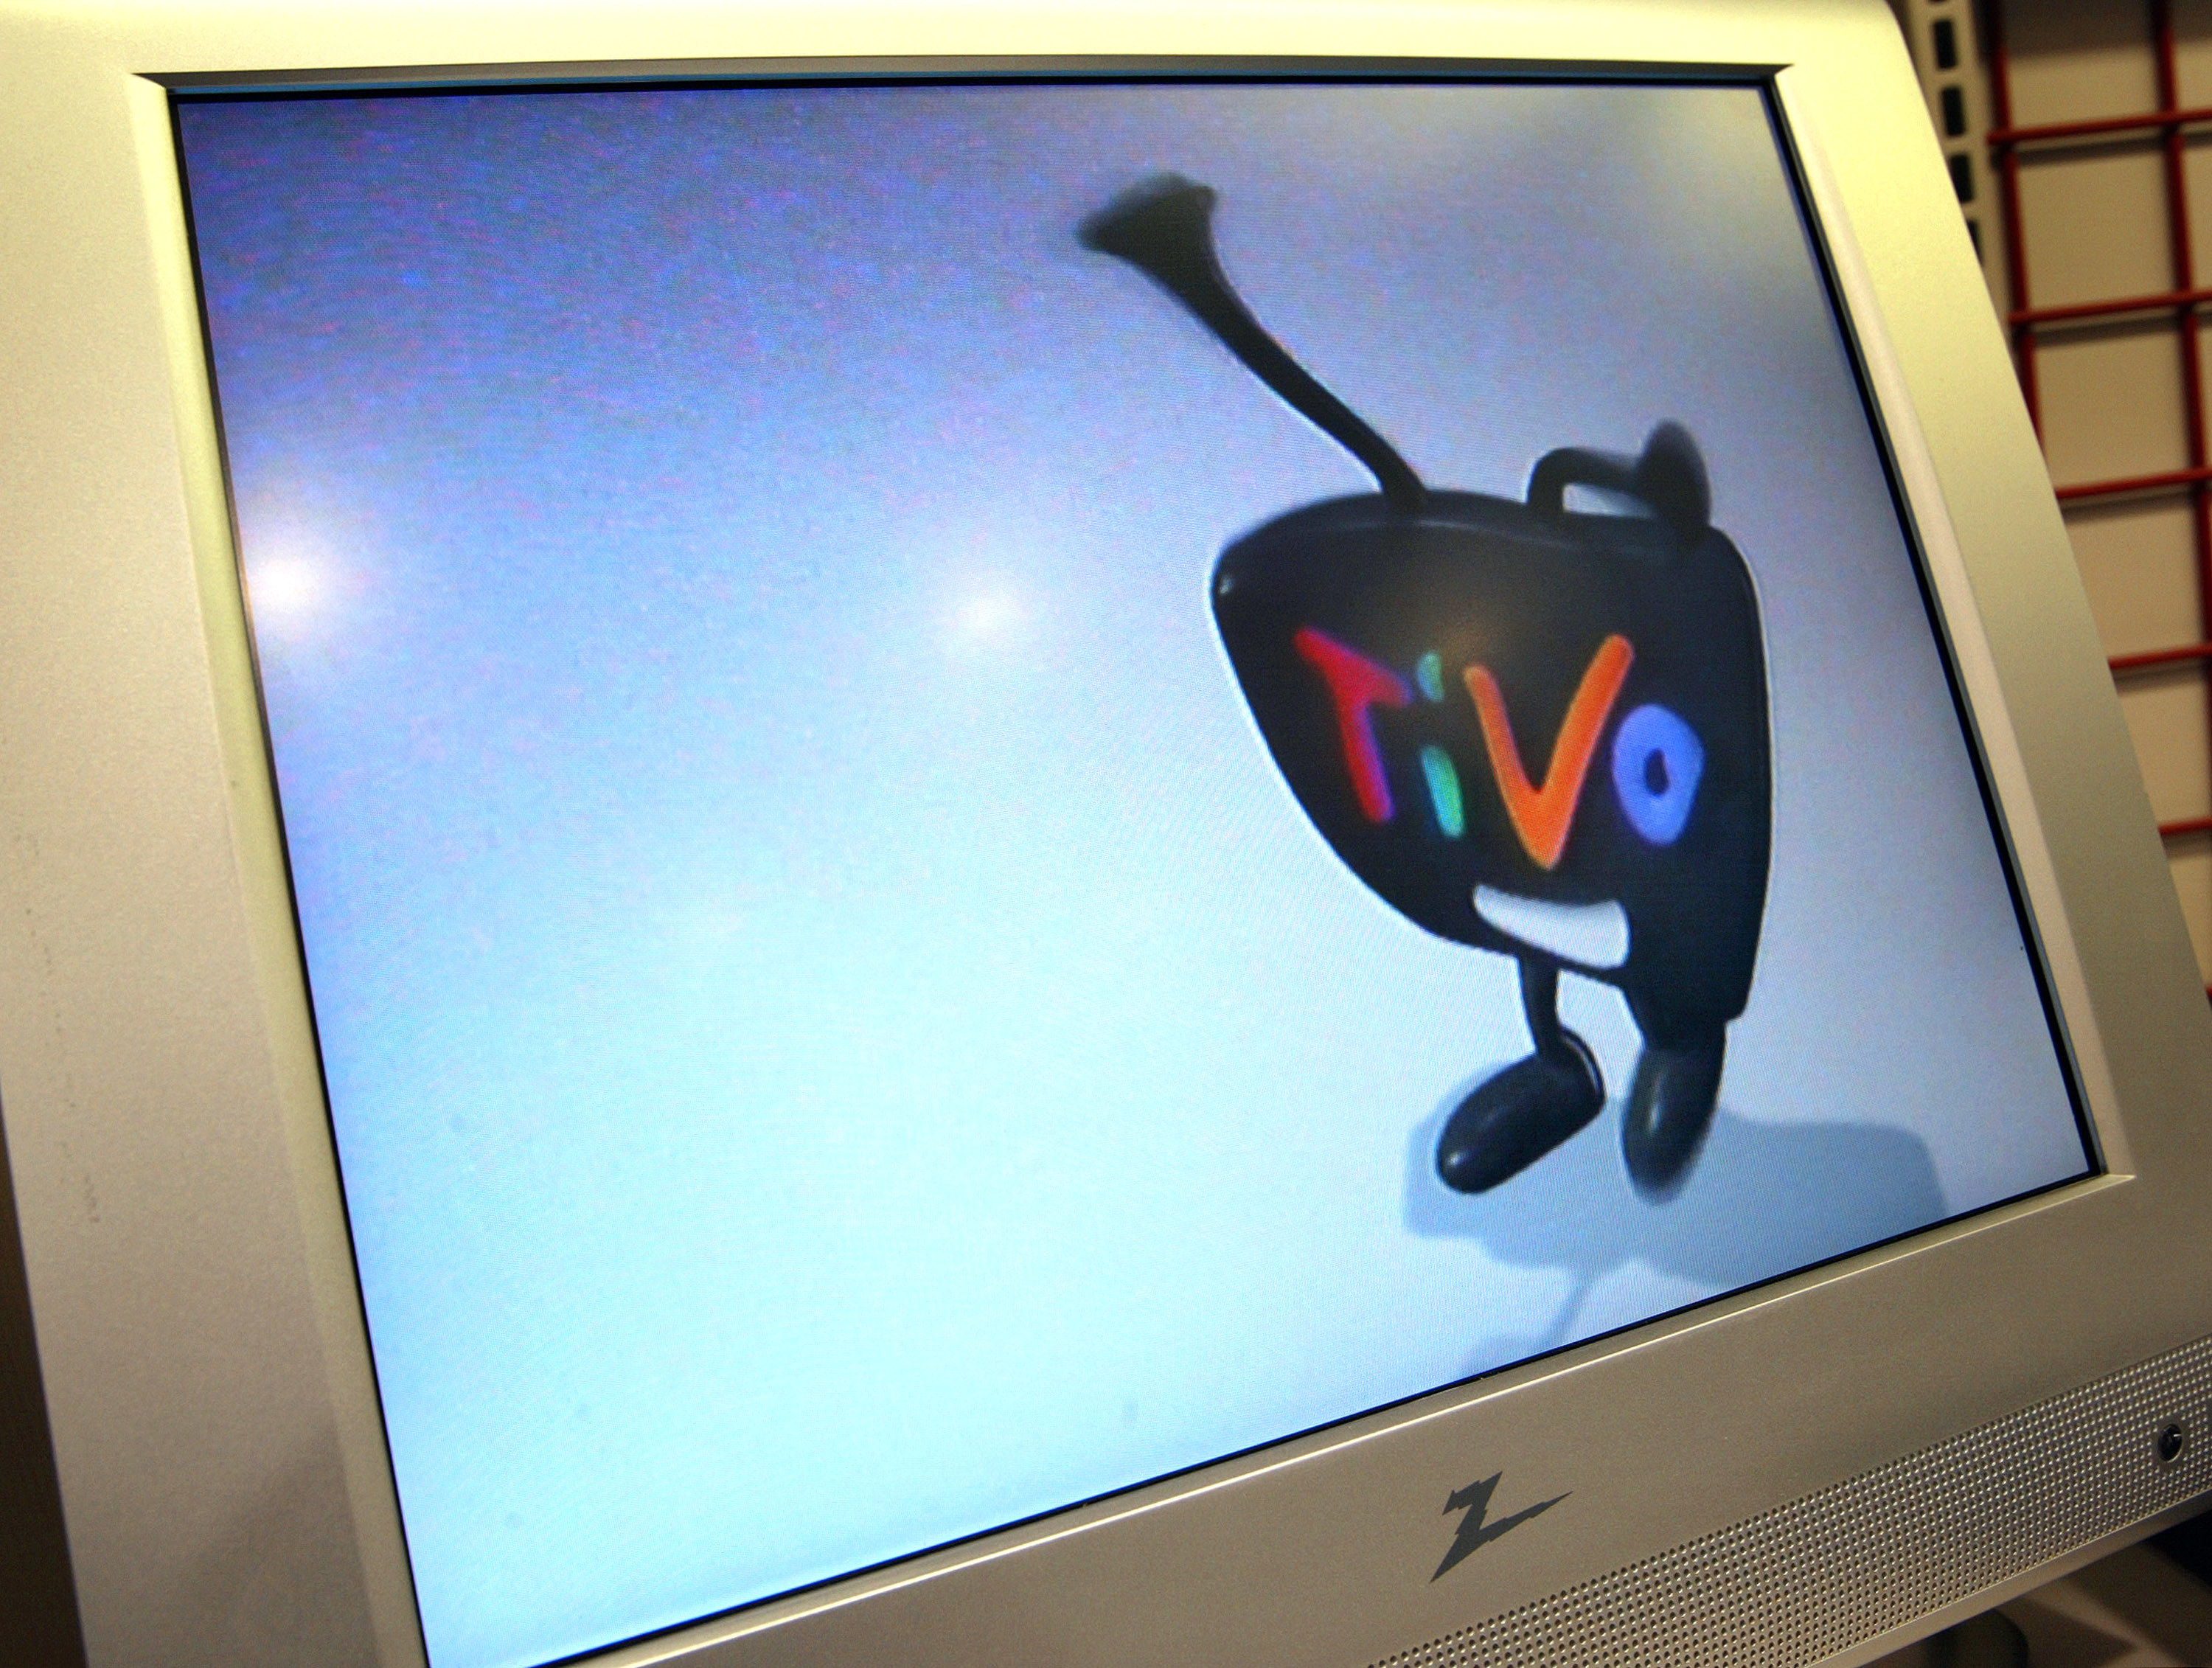 A TiVo logo is seen on a monitor at a Best Buy store